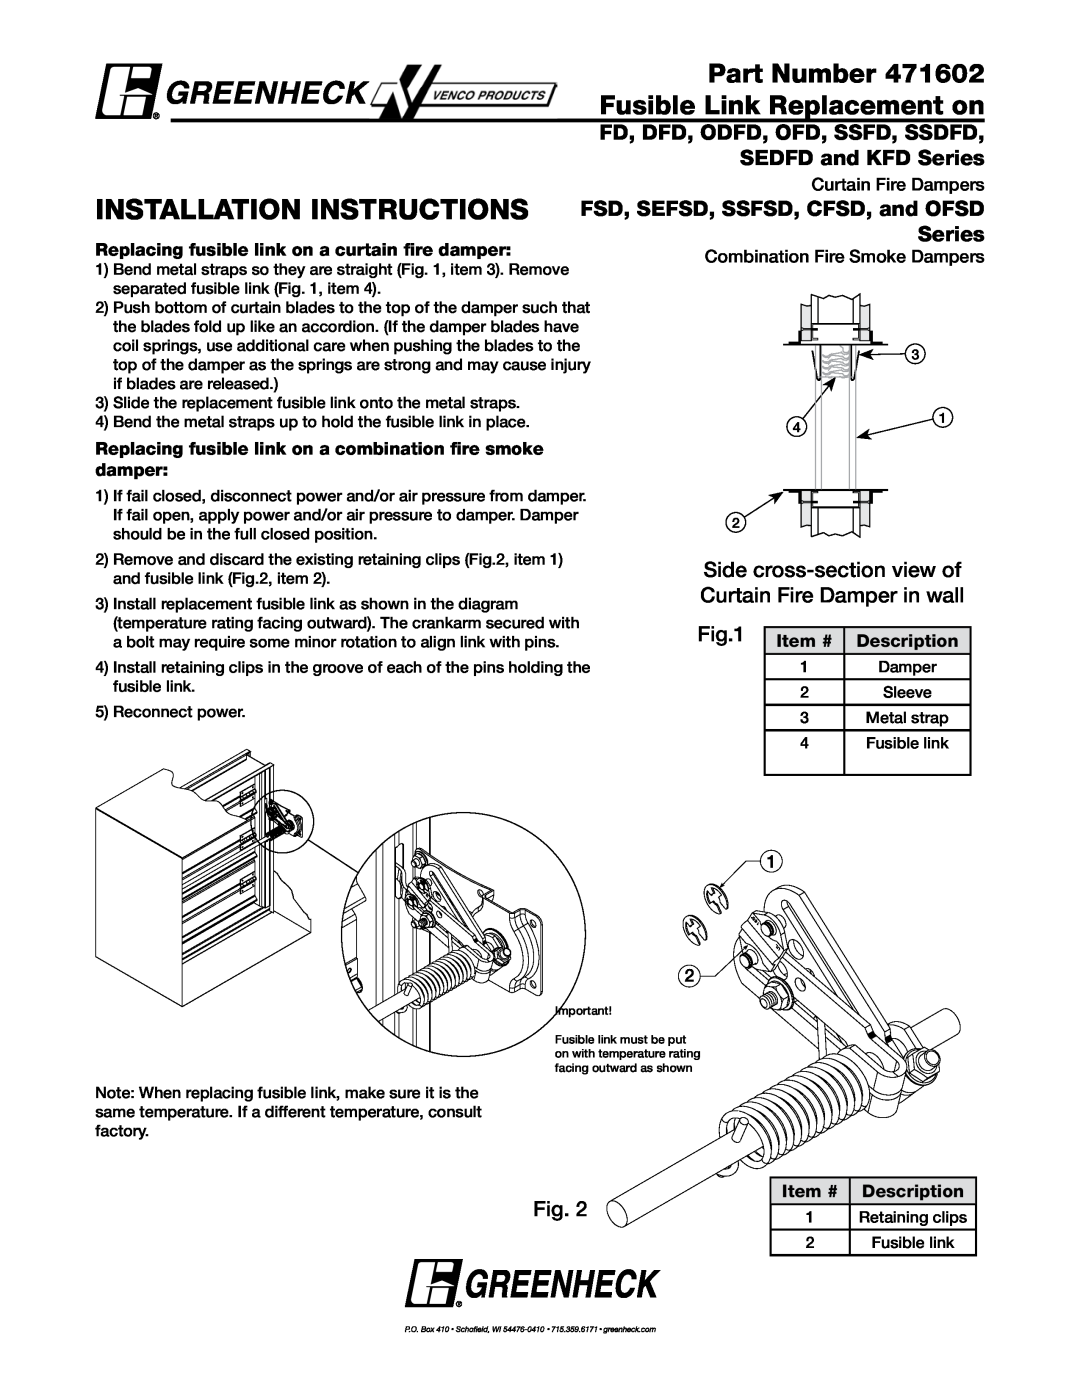 Greenheck Fan SEDFD installation instructions Installation Instructions, Part Number, Fusible Link Replacement on, Series 